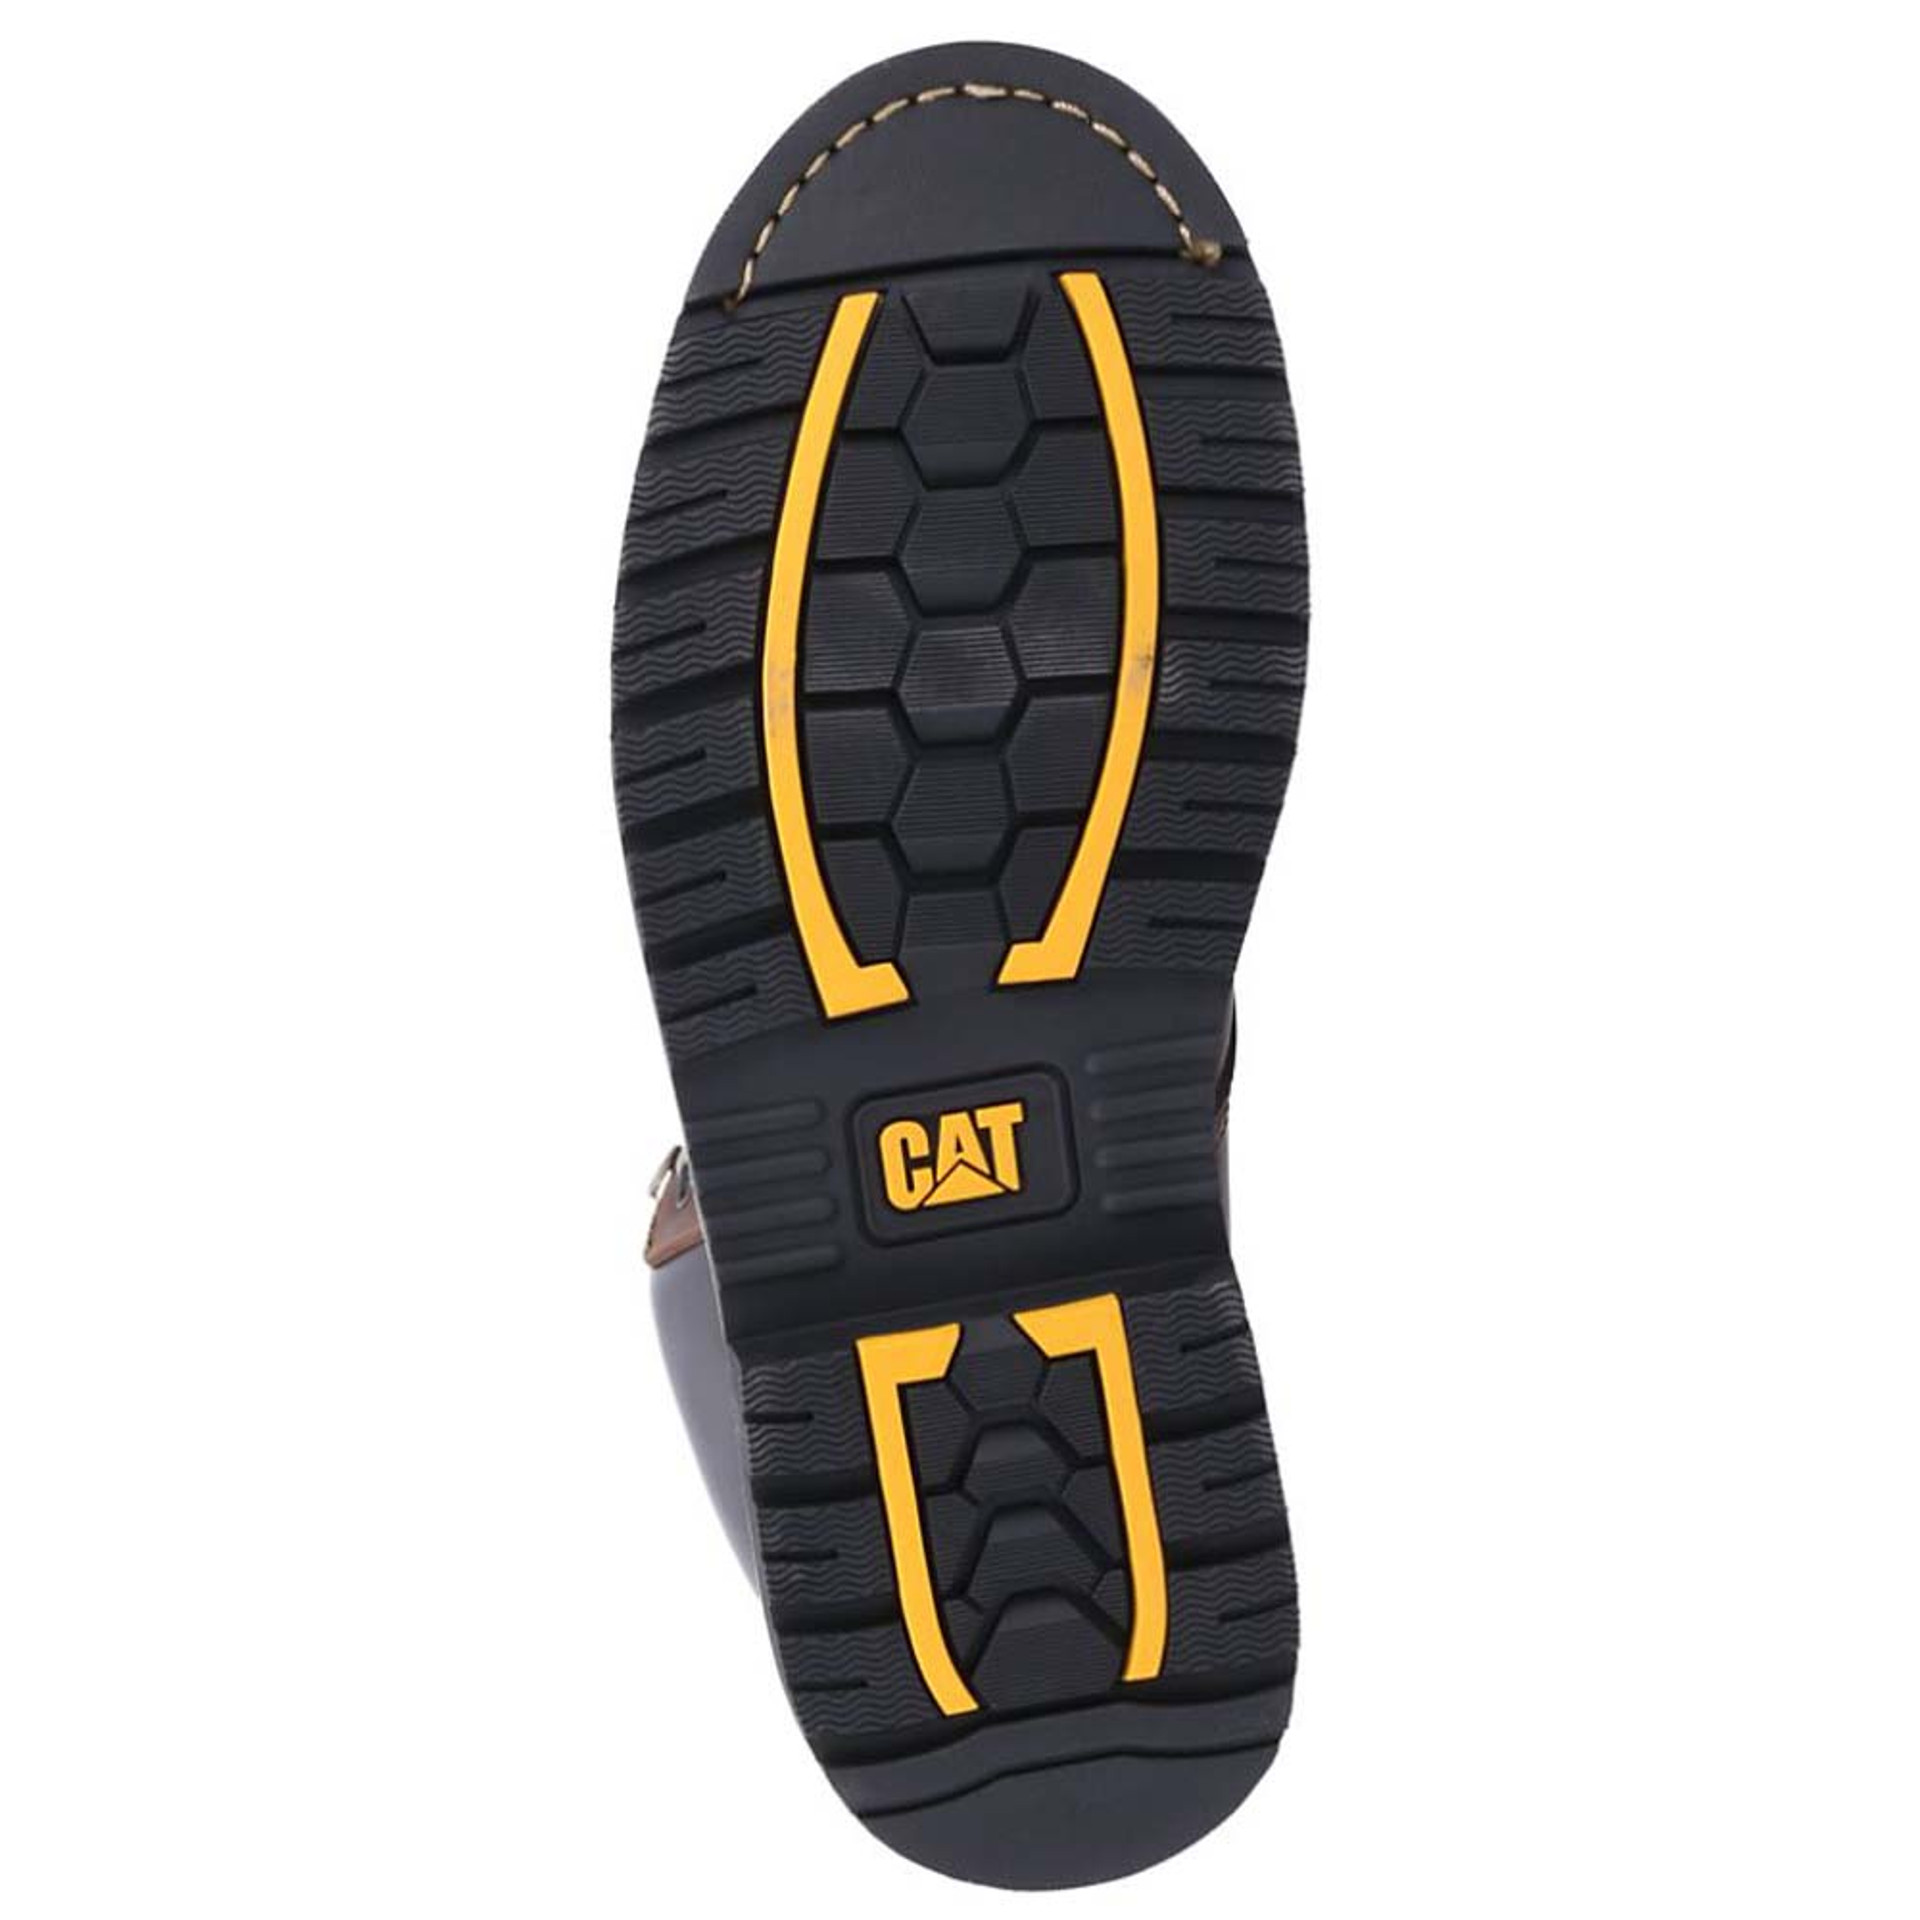 Caterpillar Powerplant Safety Boot - Brown | ITS.co.uk|